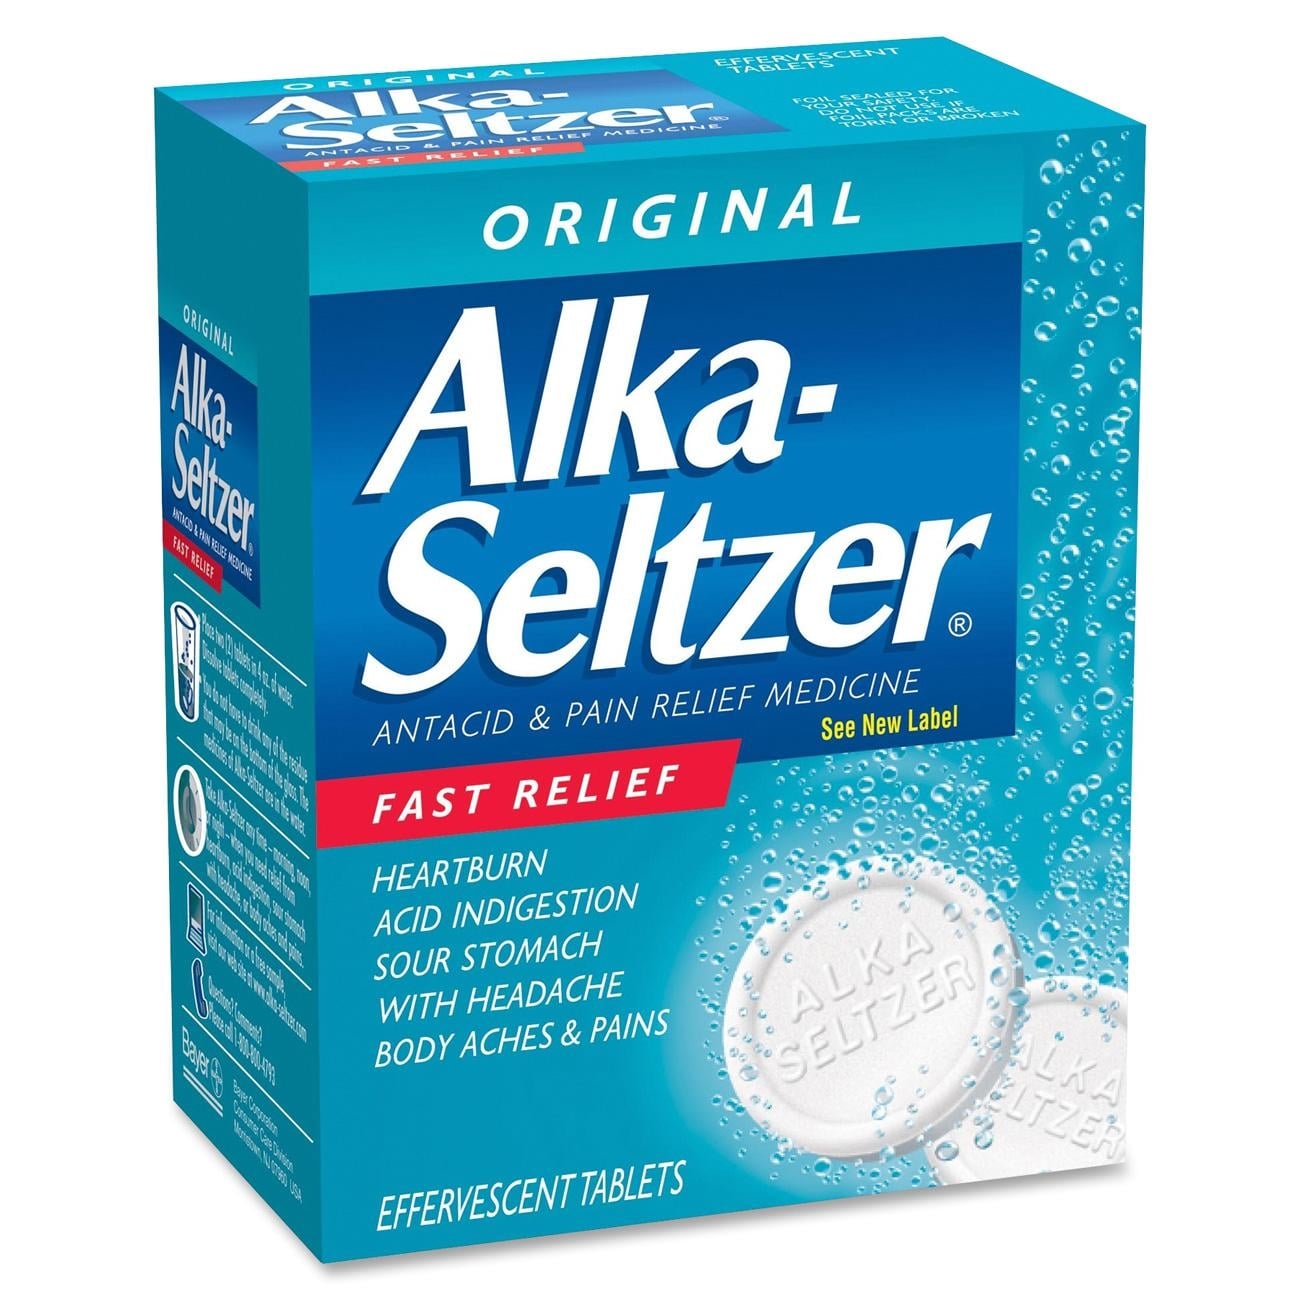 You-Only-Need-One-Alka-Seltzer.jpg